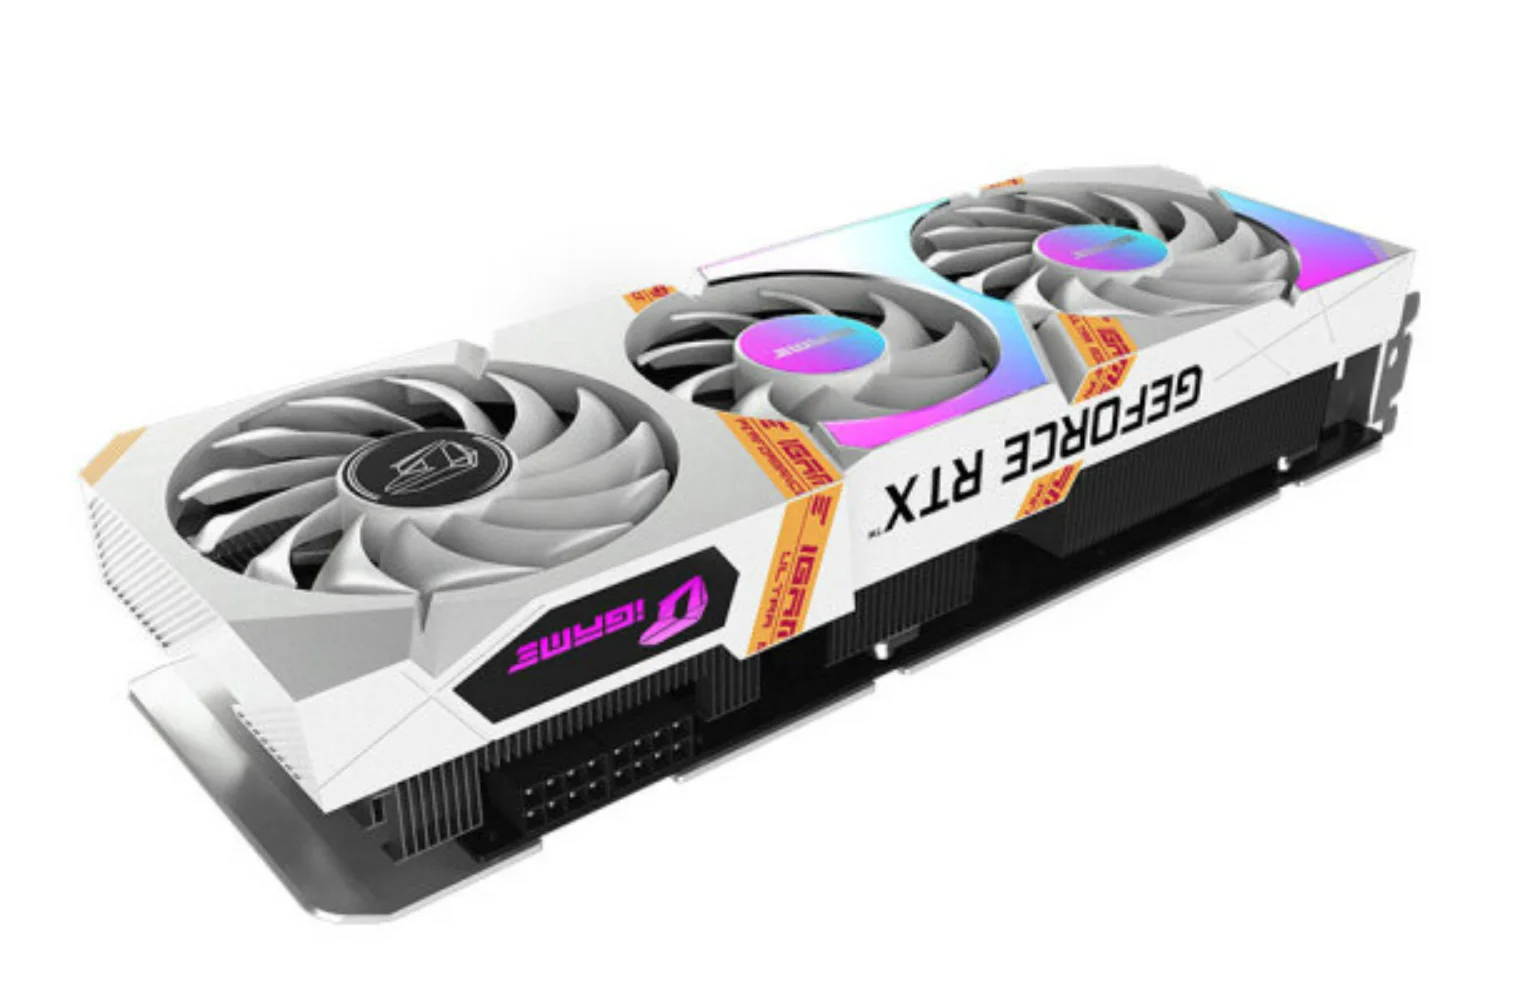 Colorful geforce отзывы. Colorful RTX 3060 12gb. Colorful IGAME GEFORCE RTX 3060 ti Ultra w OC. Colorful GEFORCE RTX 3060 12 ГБ (IGAME GEFORCE RTX 3060 Ultra w OC 12g l-v), LHR. RTX 3060 12gb colorful IGAME.